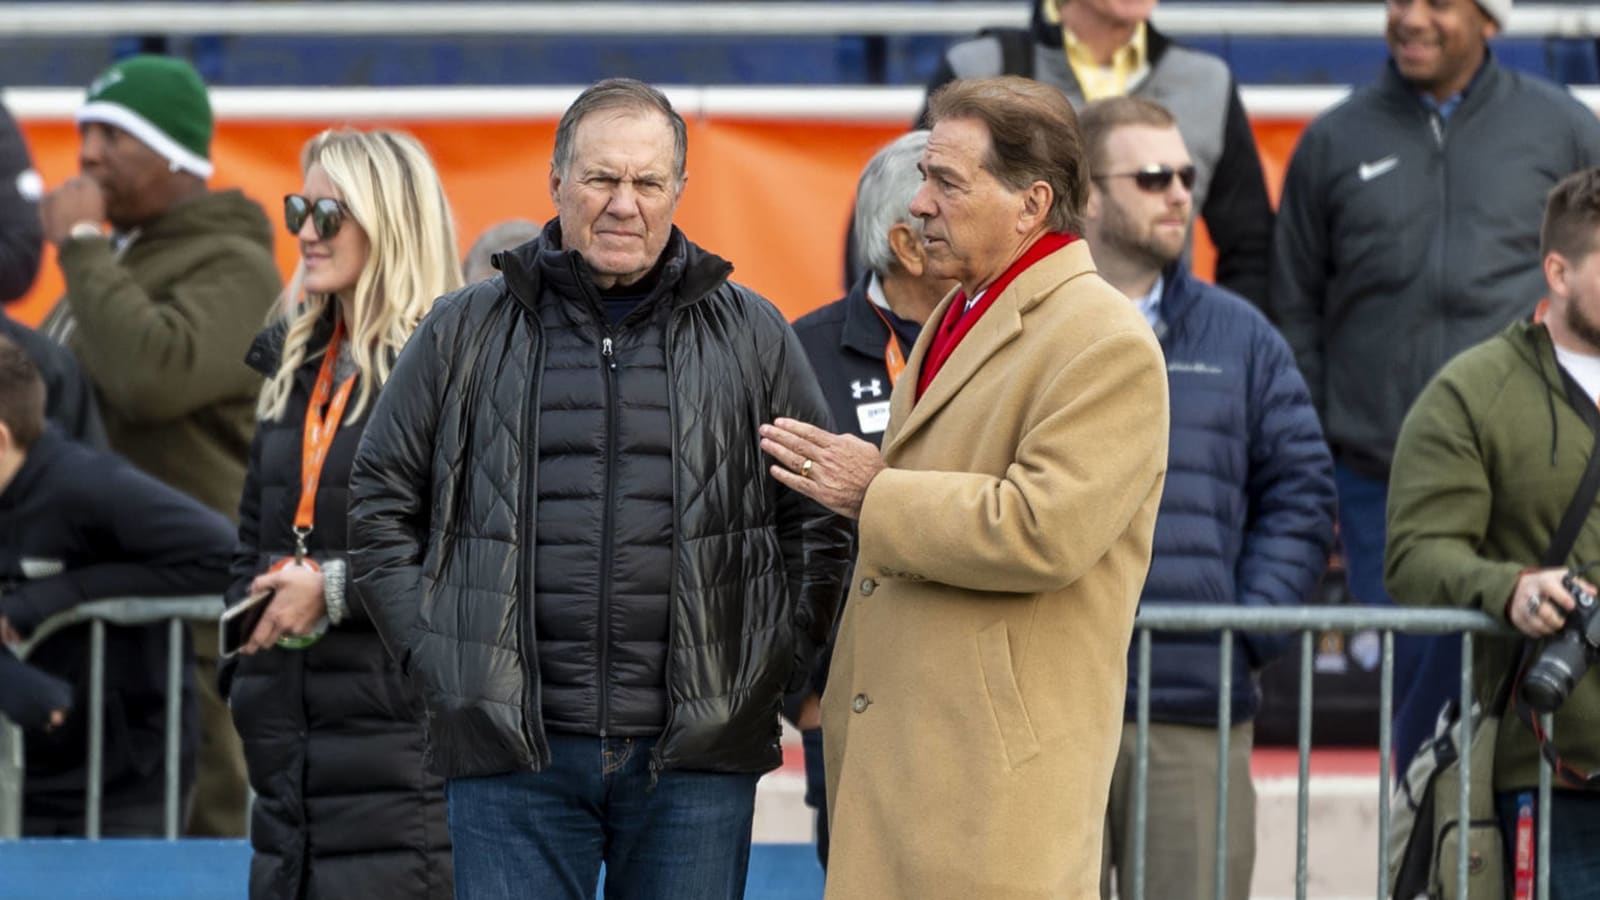 Saban details discussions he had with Belichick about Jones